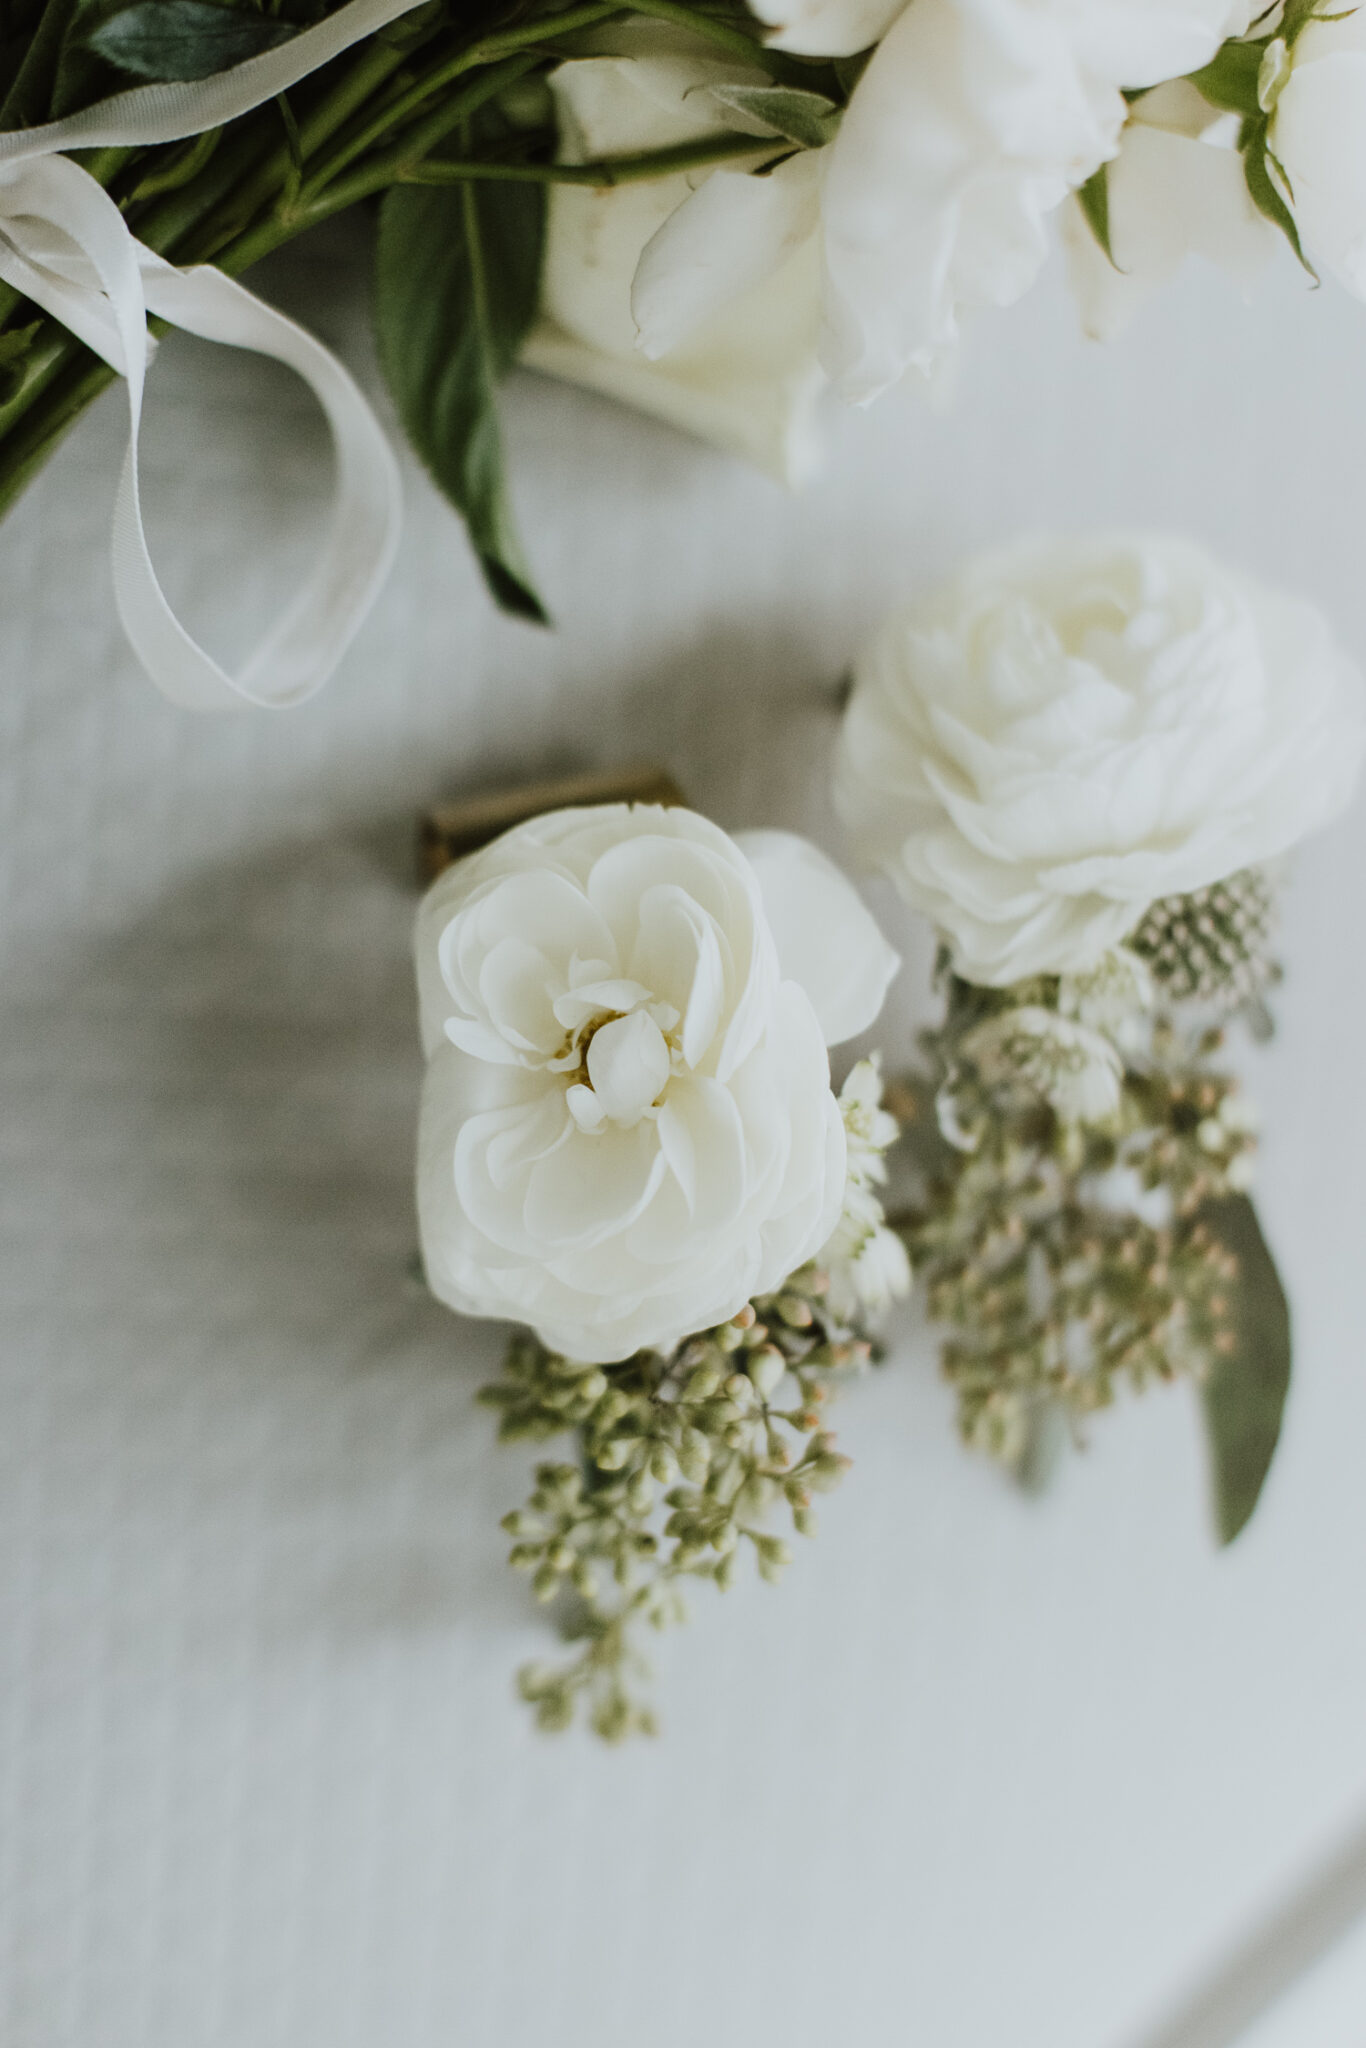 groom's boutonniere with white flower